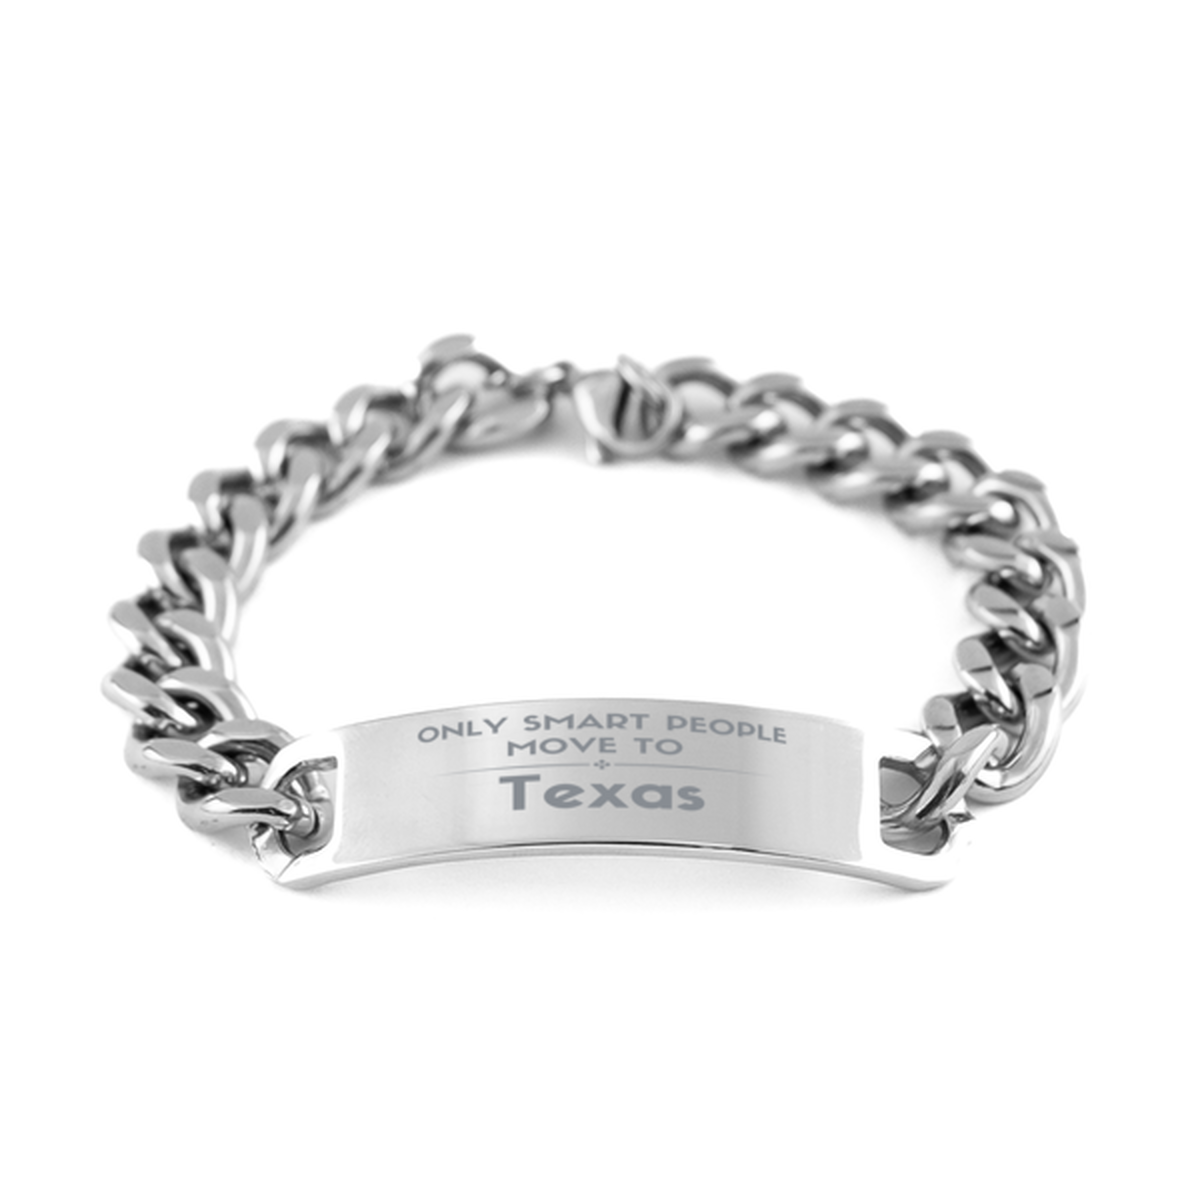 Only smart people move to Texas Cuban Chain Stainless Steel Bracelet, Gag Gifts For Texas, Move to Texas Gifts for Friends Coworker Funny Saying Quote